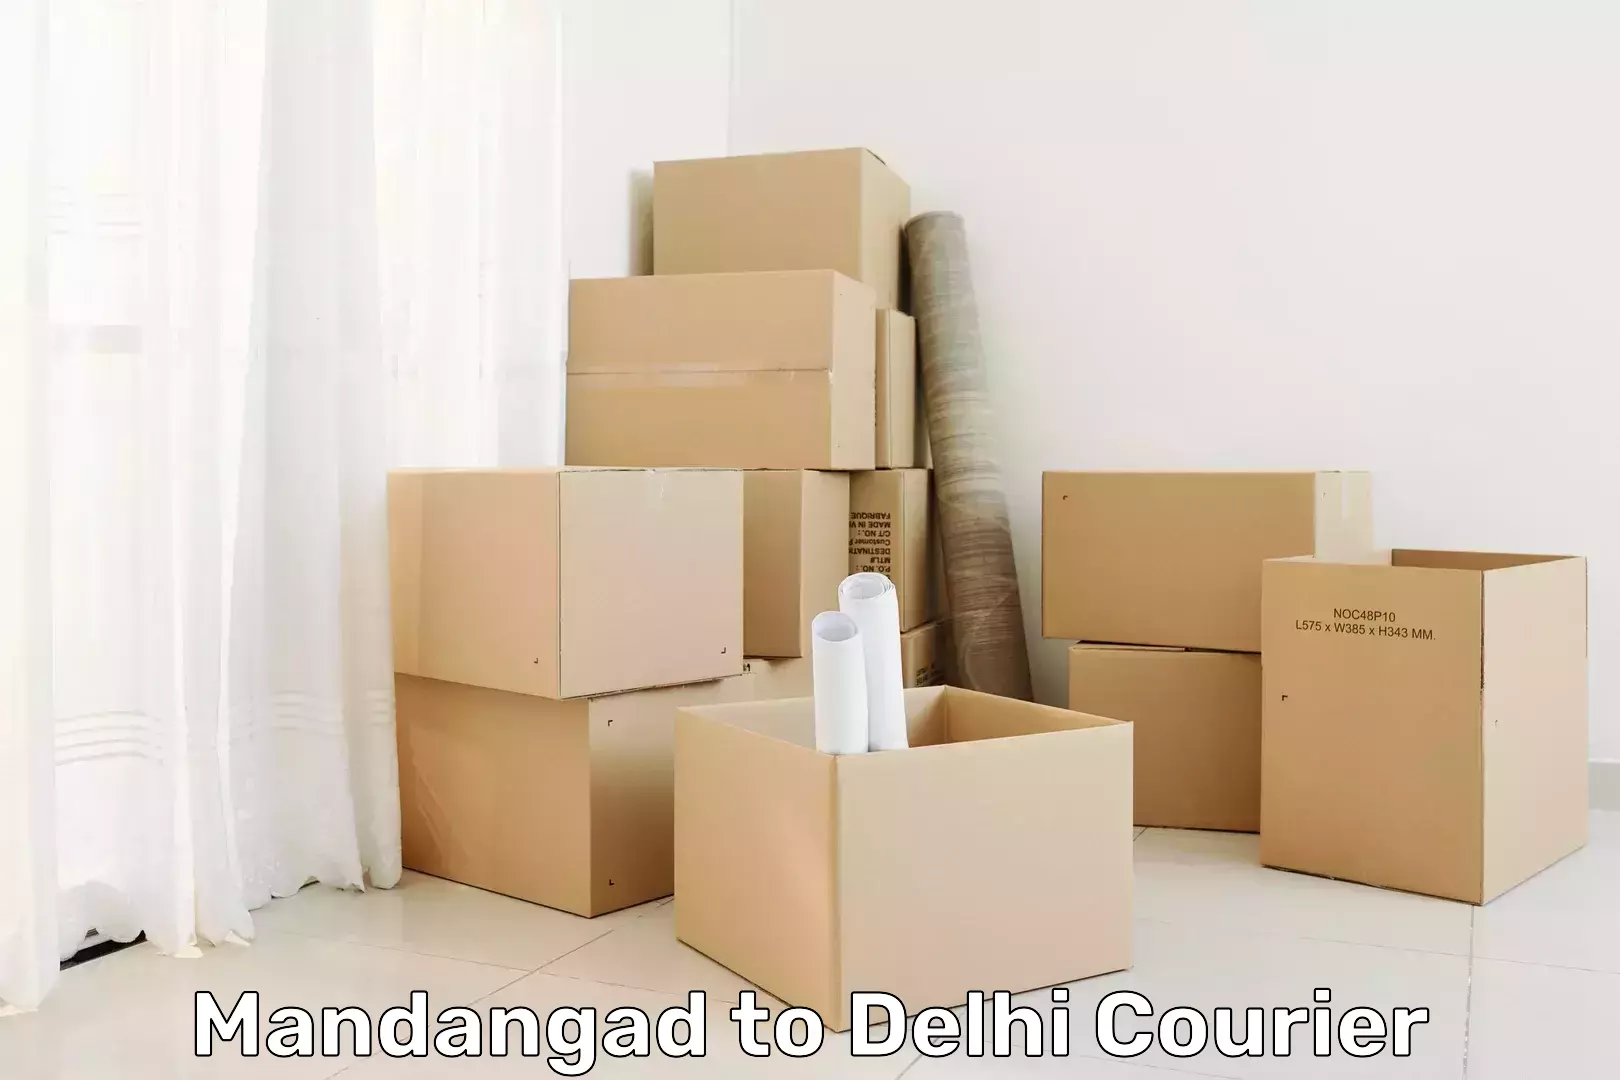 Global courier networks Mandangad to East Delhi